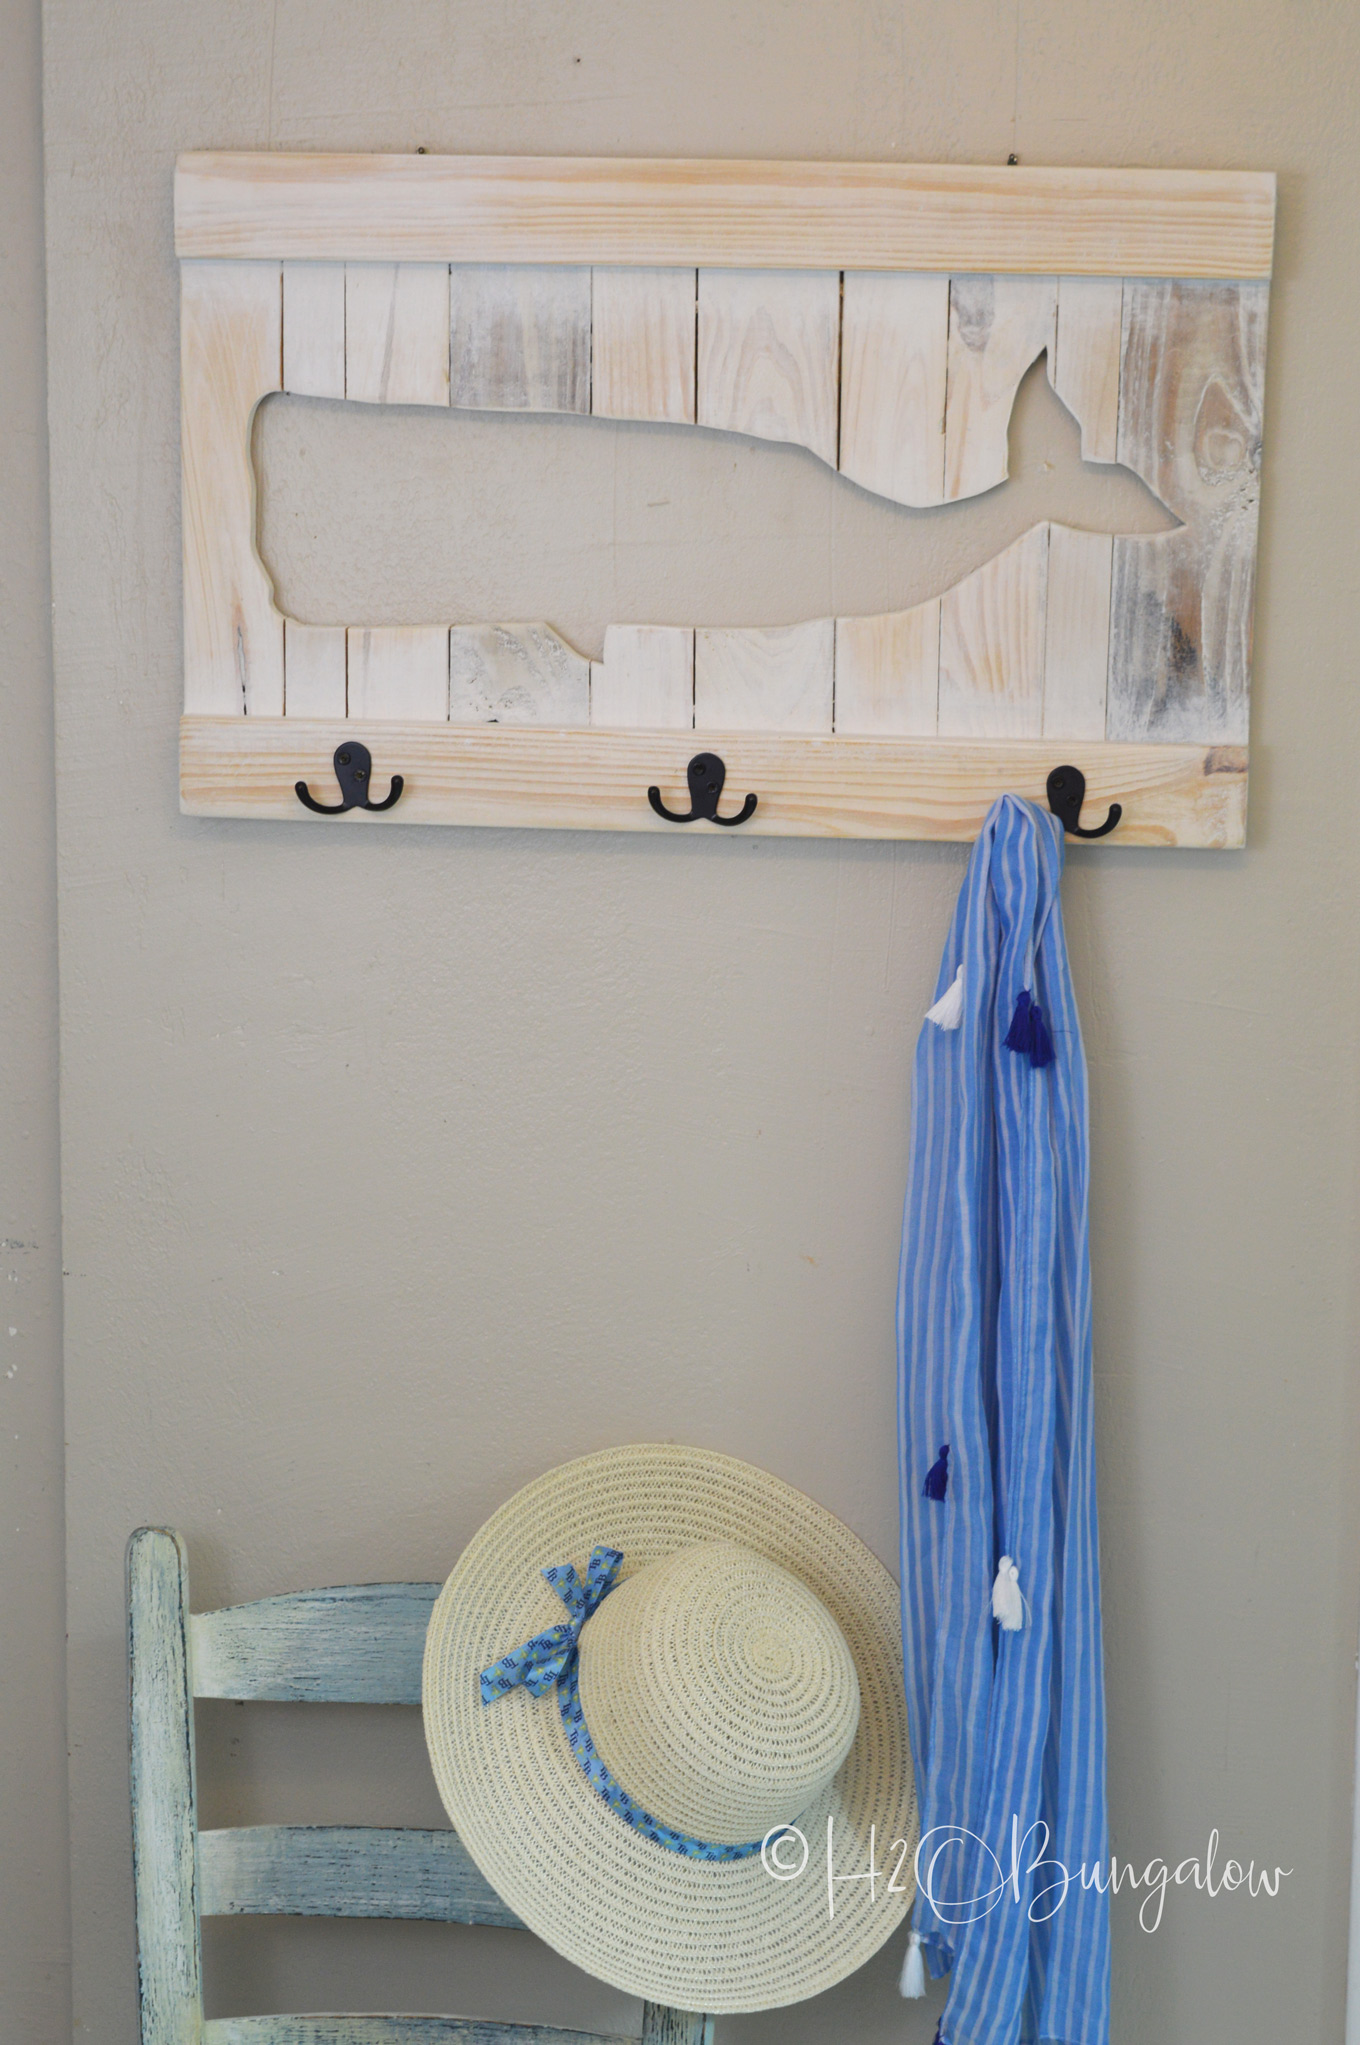 You can easily make a DIY whale coat rack or towel rack for beach towels like mine out of pallets or scrap wood. Follow my instructions for a wood cut-out whale and use your own design to make a sturdy custom coat or towel rack that fits your decor style! 